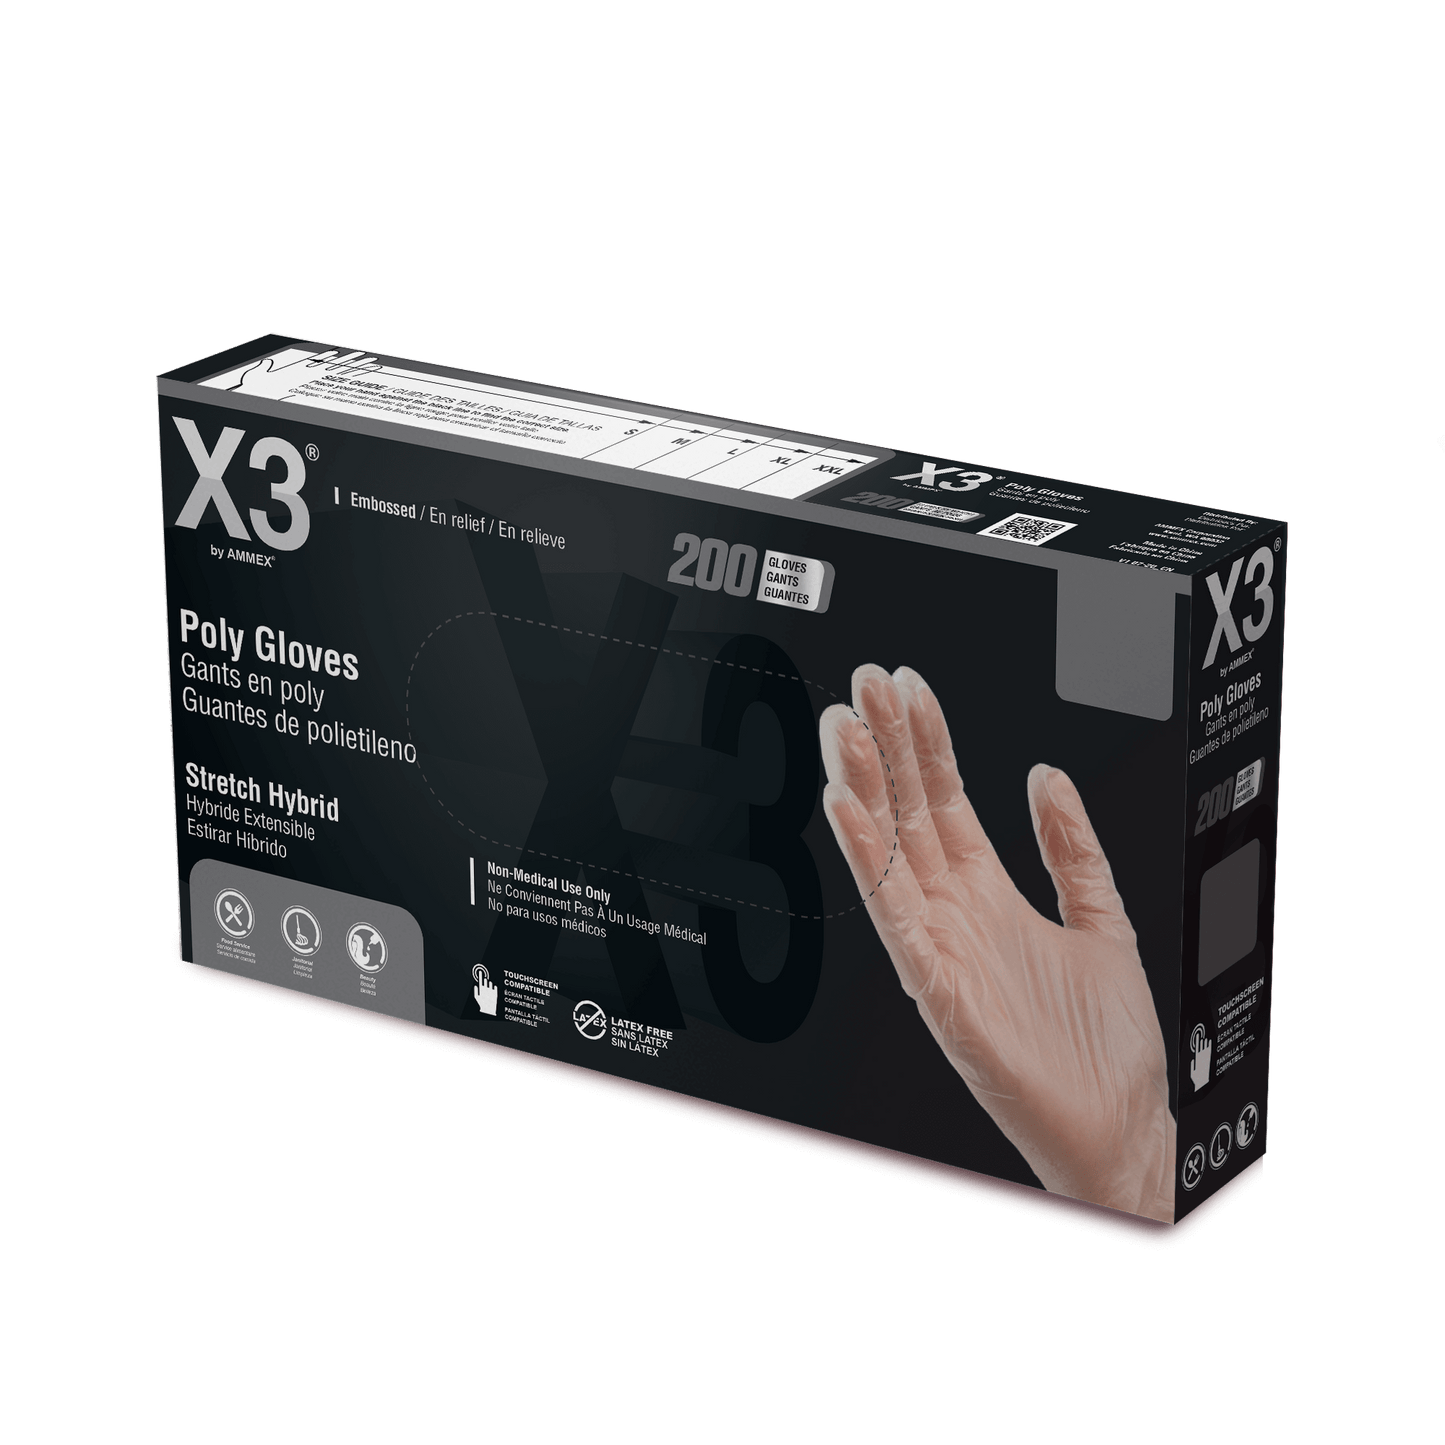 AMMEX X3 Industrial Poly Gloves Case of 2000